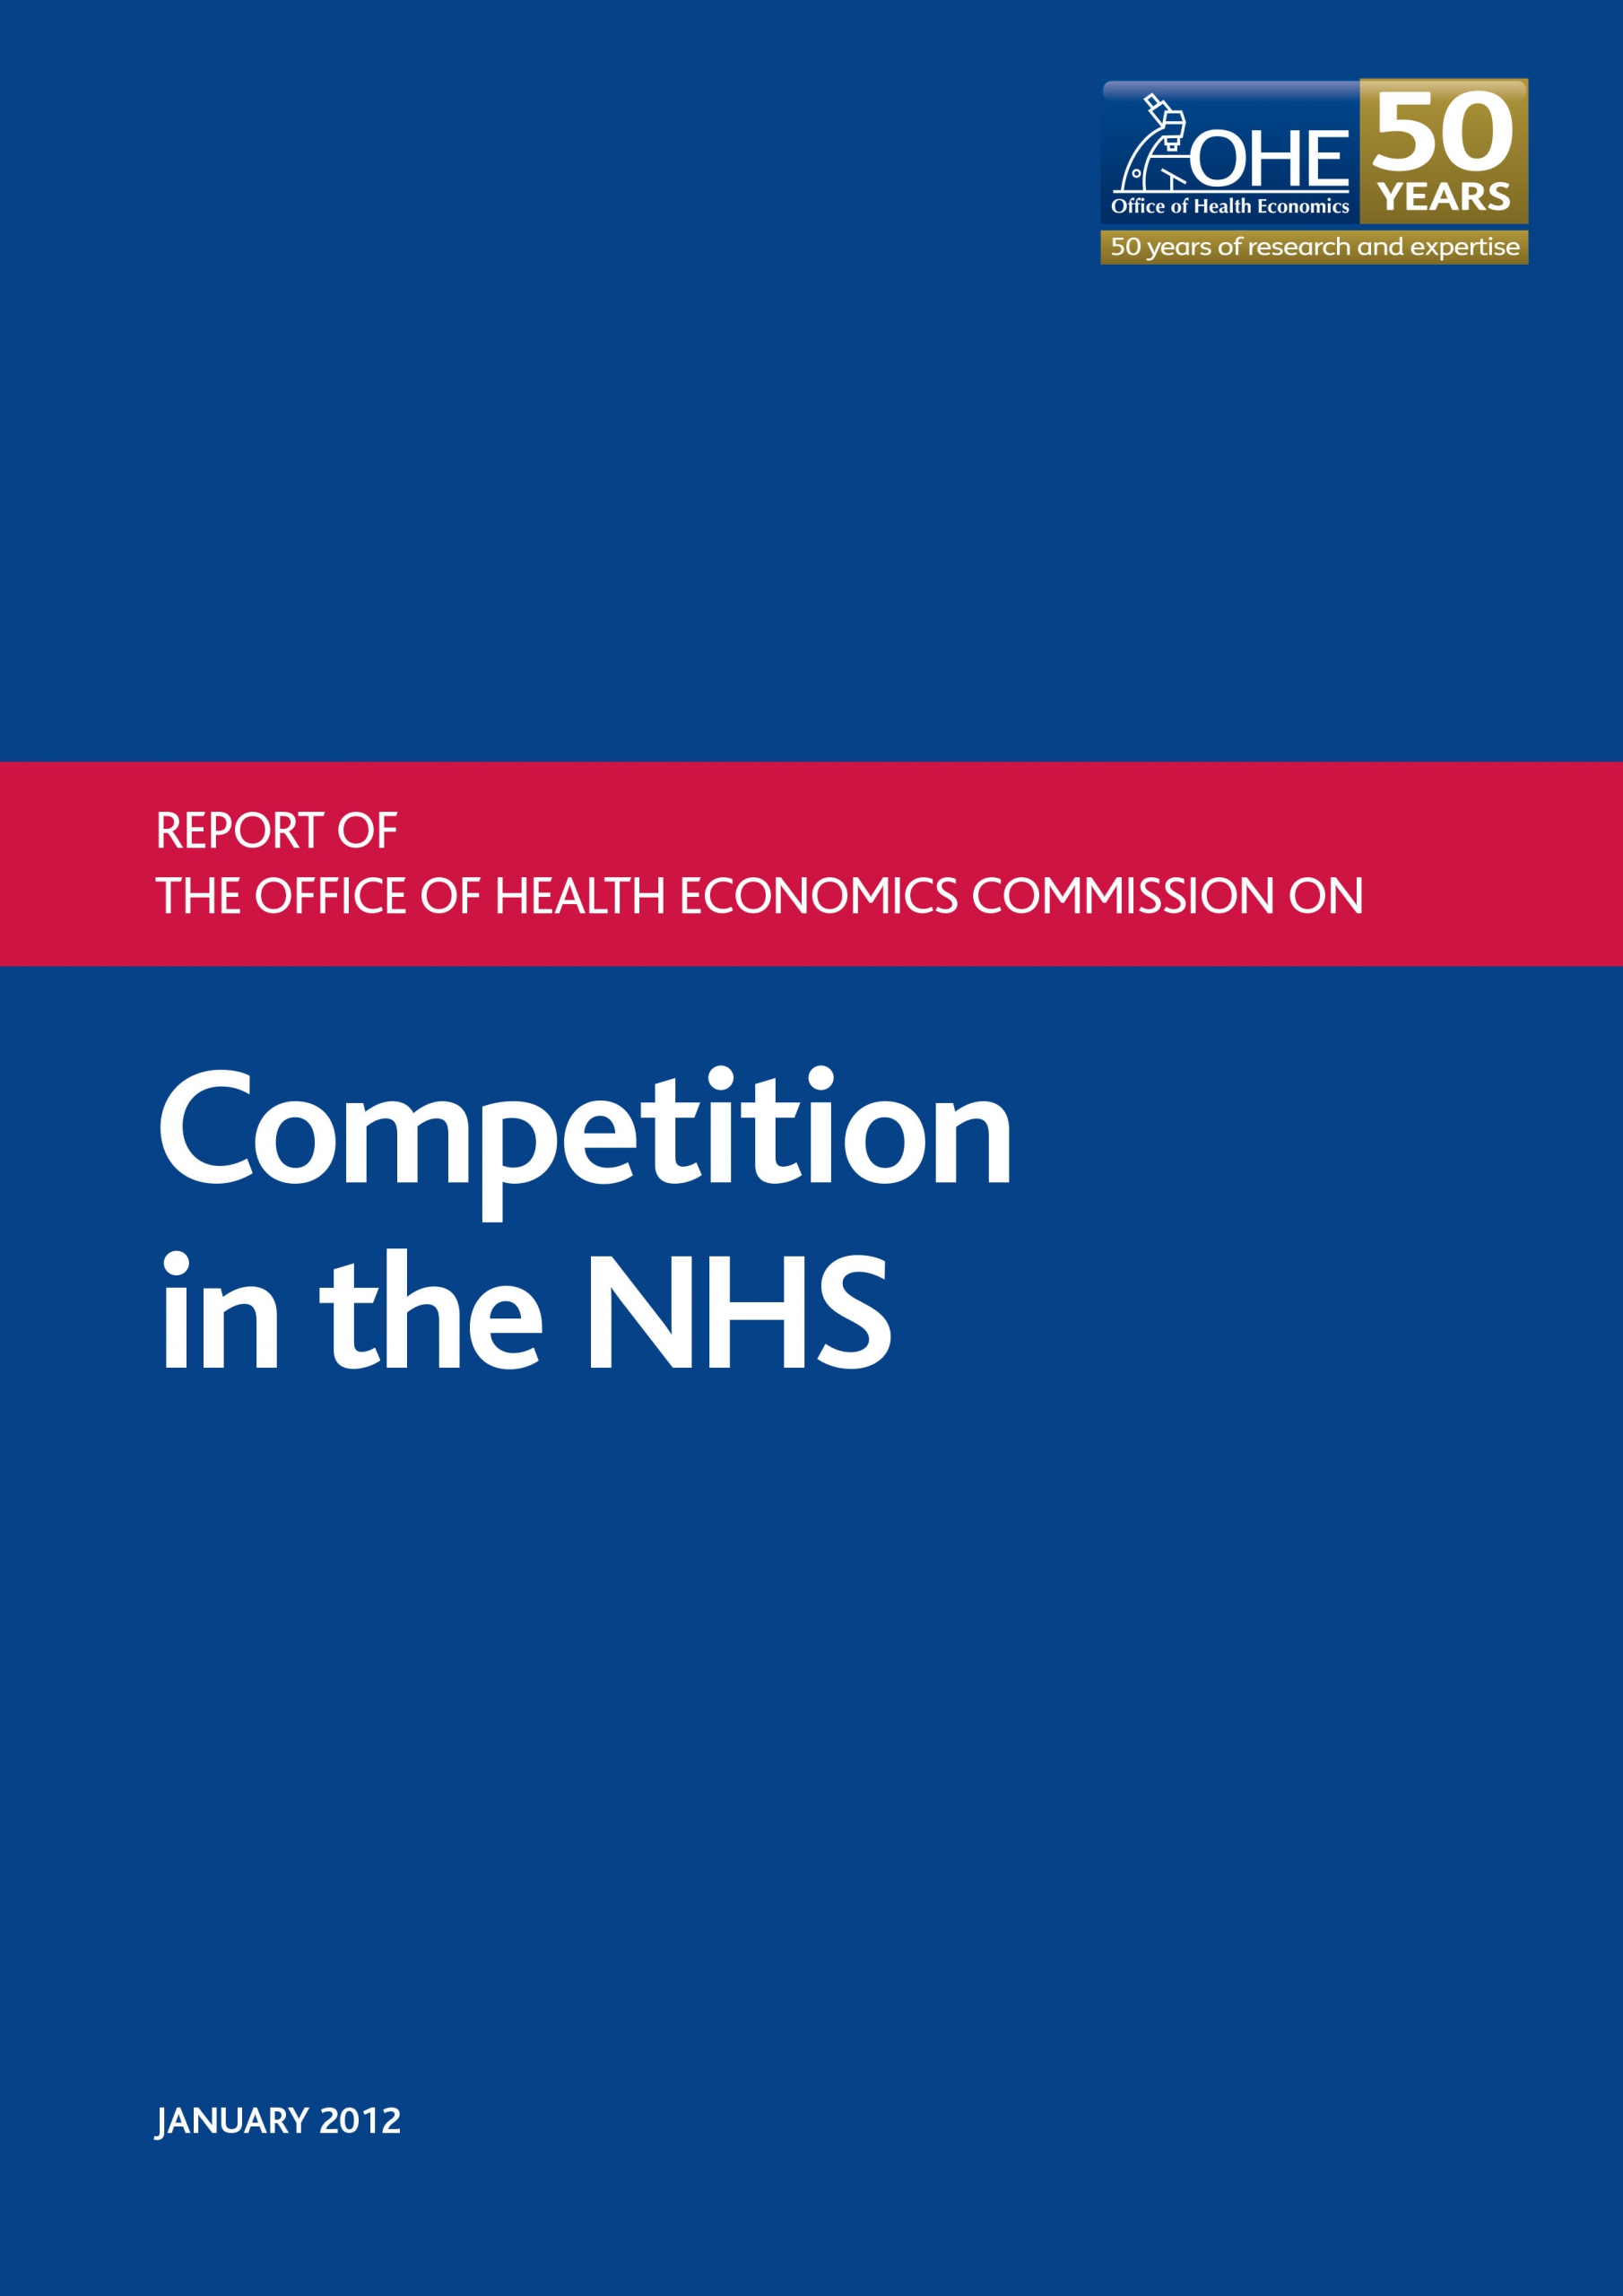 Report of the Office of Health Economics Commission on Competition in the NHS